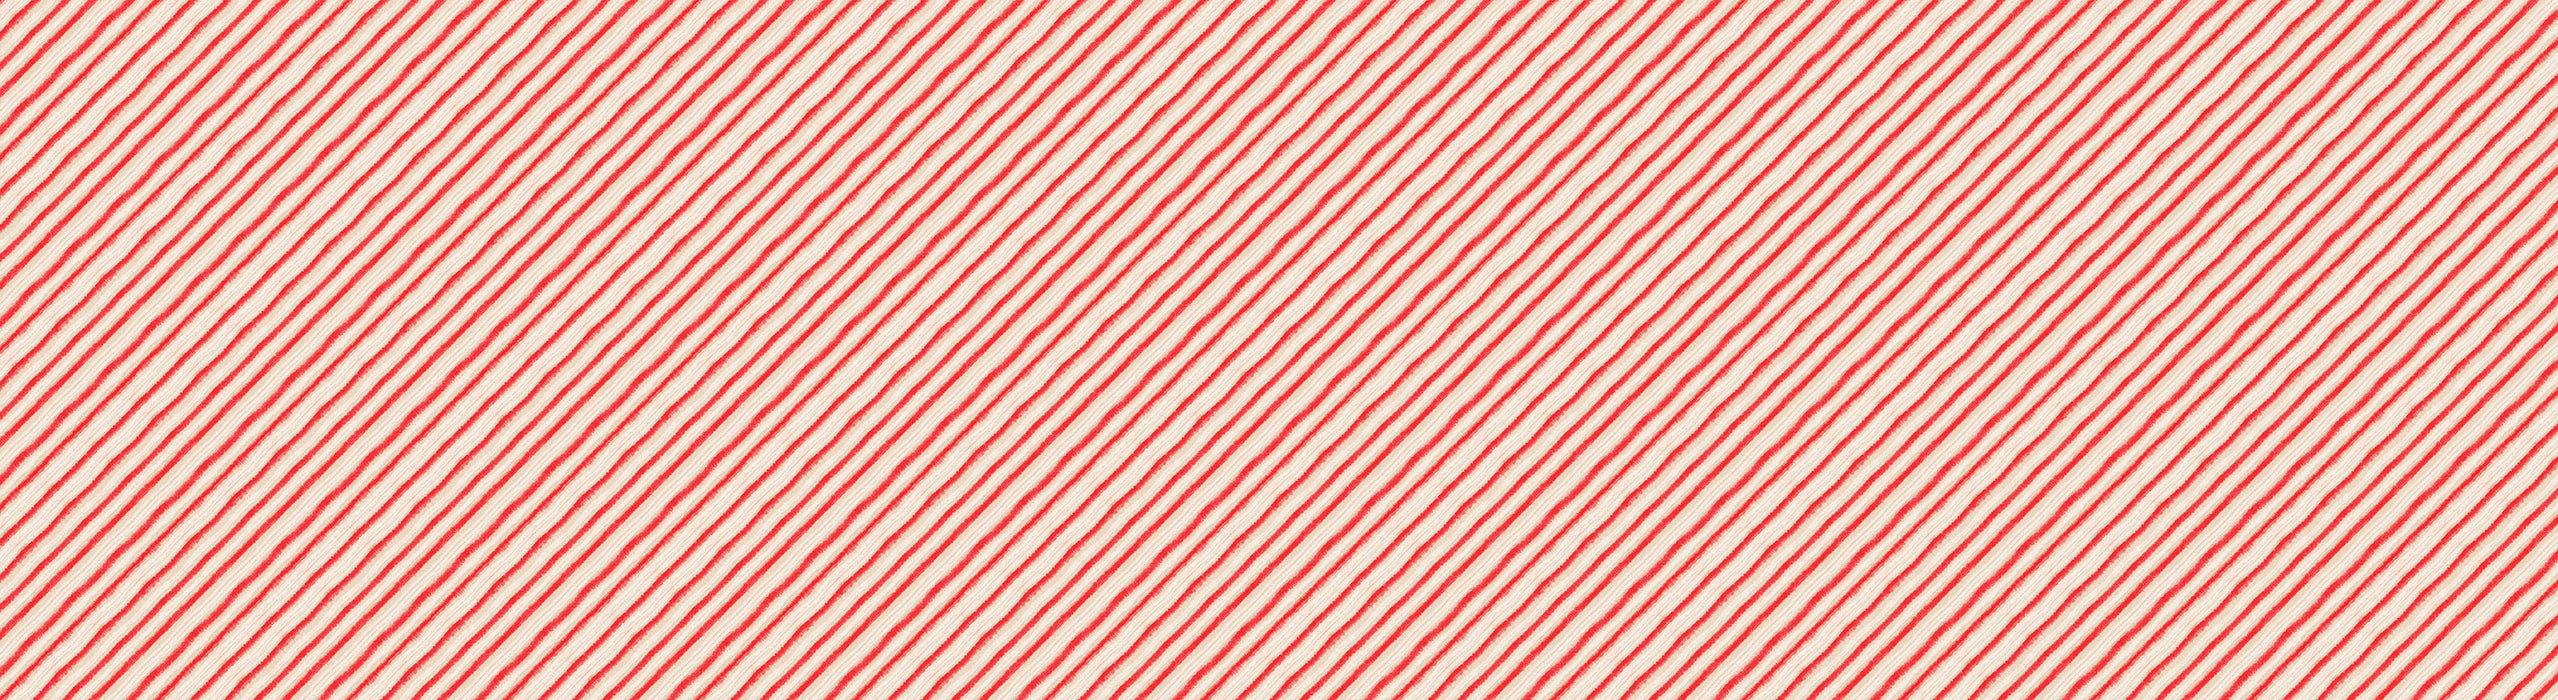 Holly Jolly, Peppermint Stripes in Red - SOLD BY THE YARD